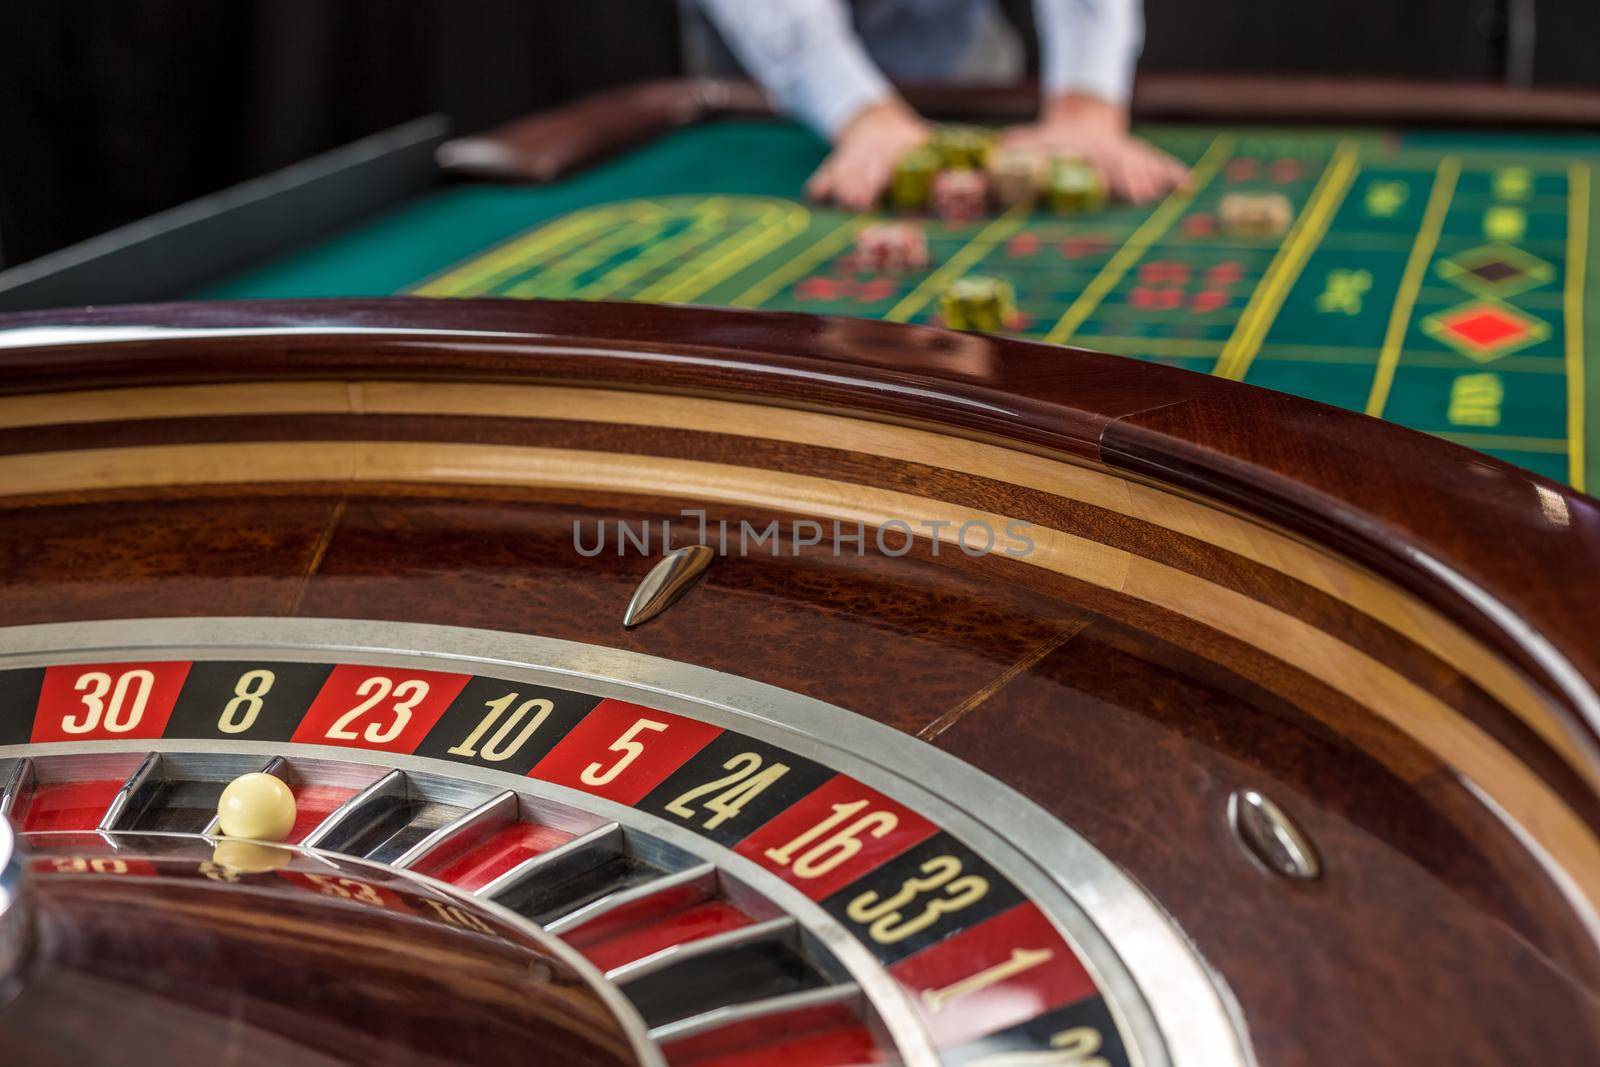 Roulette and piles of gambling chips on a green table in casino. Man hand over casino chips - bet.